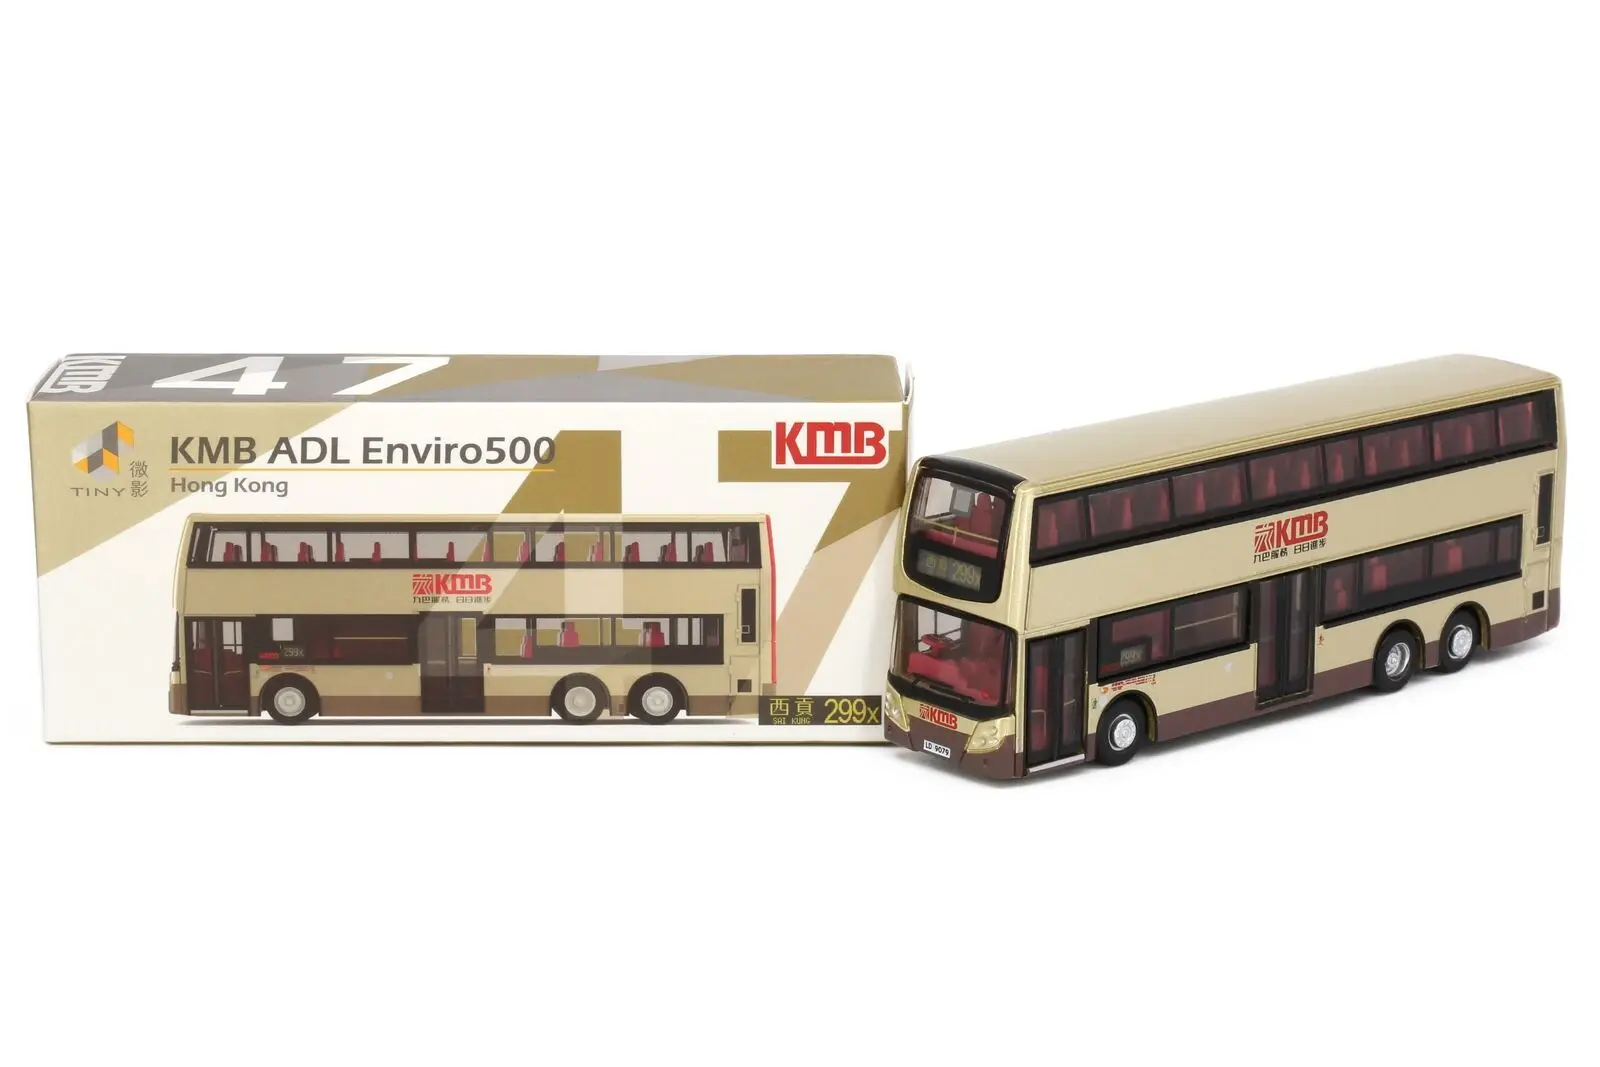 

Tiny City Die-cast 1:110 KMB ADL Enviro500 (299X) Bus DieCast Model Car Collection Limited Edition Hobby Toy Car